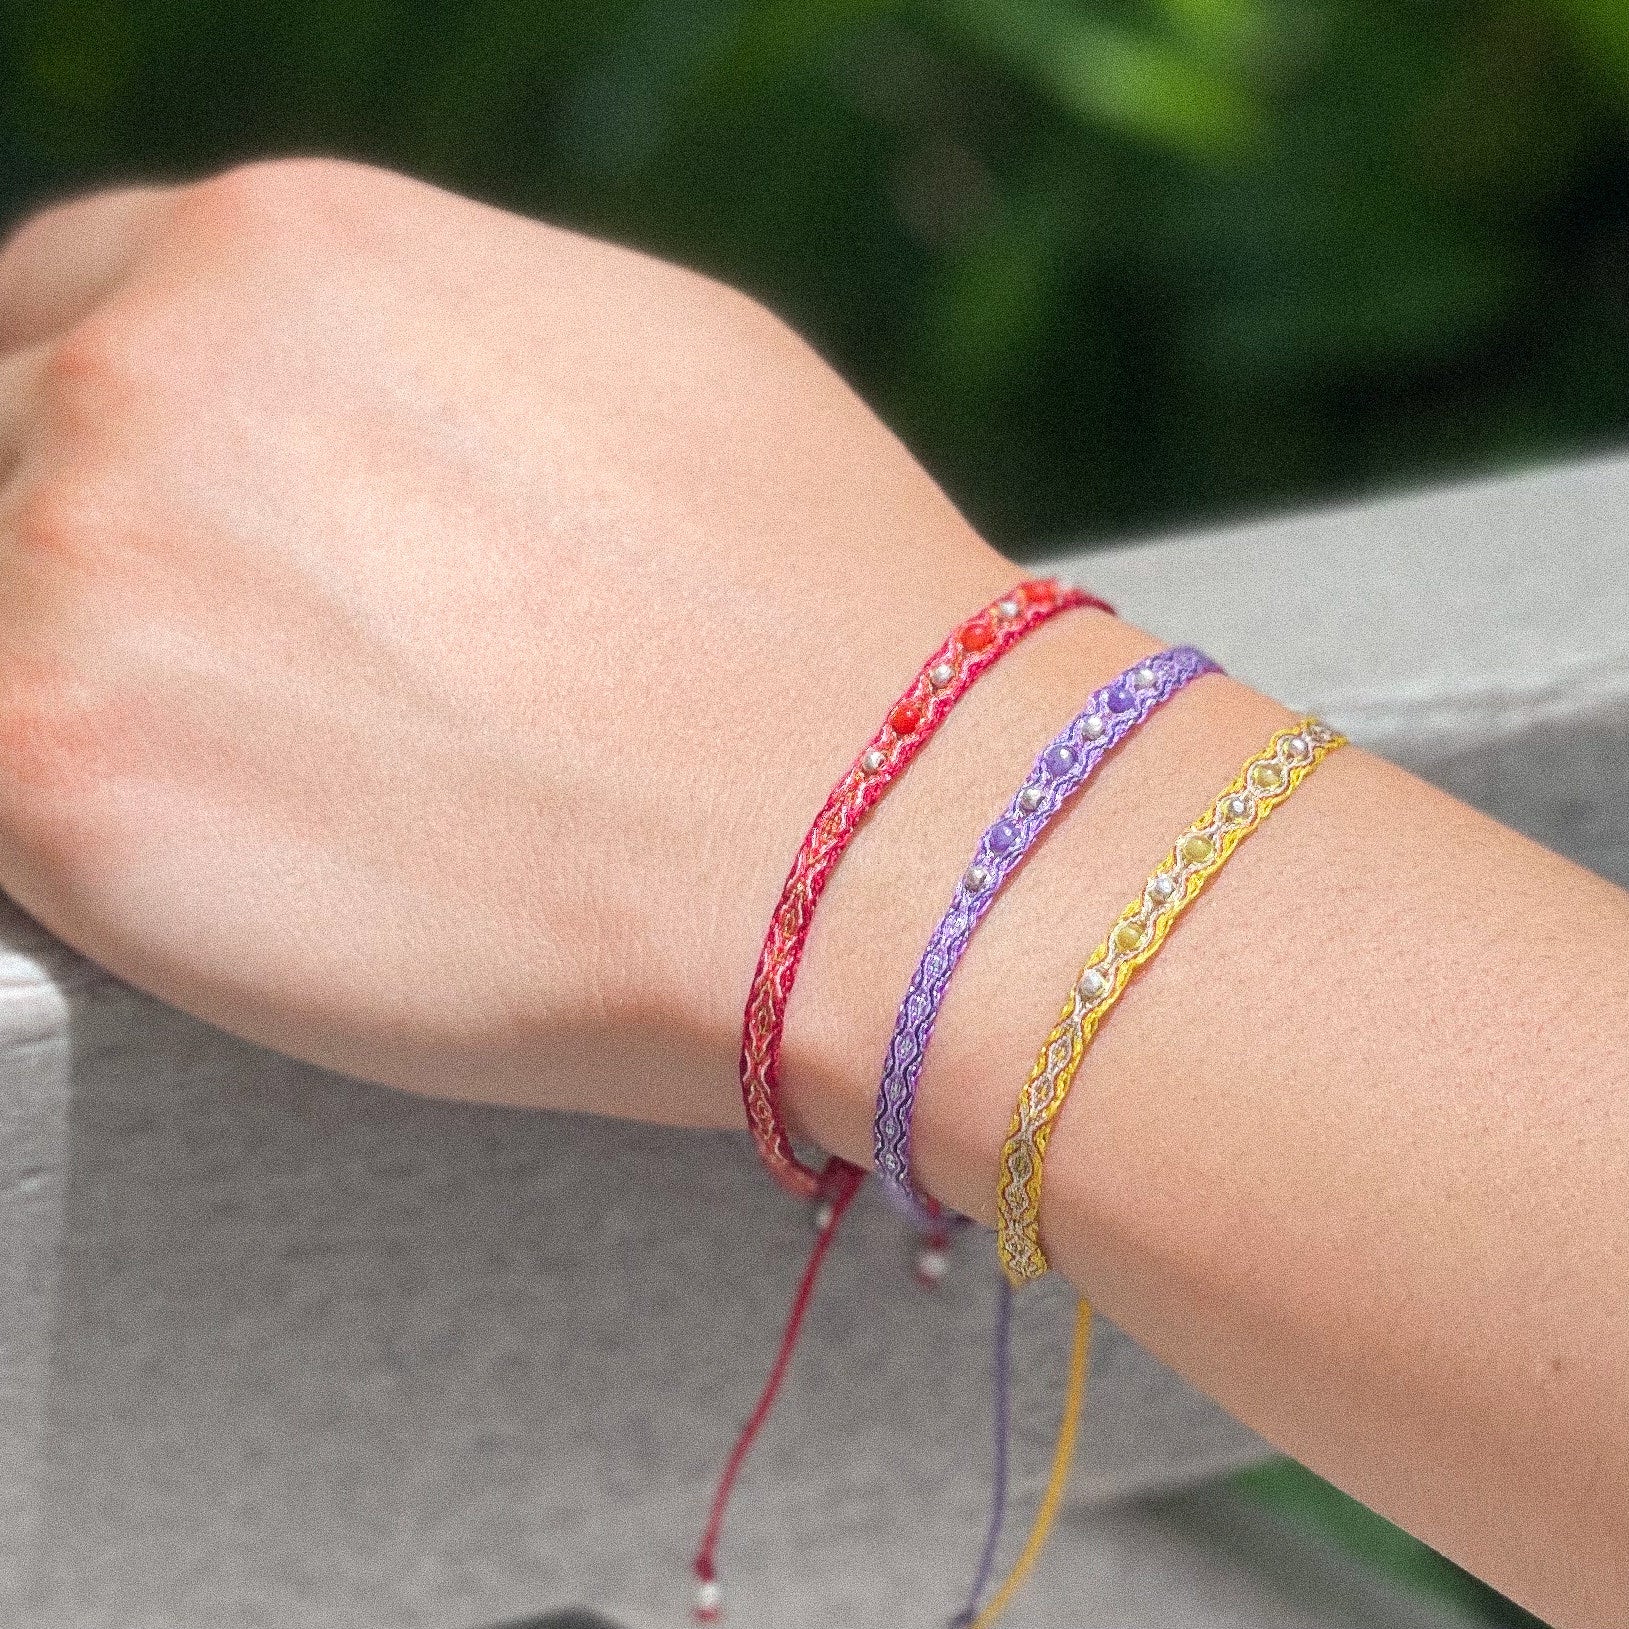 Egyptian Loom Chakra Bracelet, Red, Violet, Yellow with gemstones and silver beads, 40 threads adjustable bracelet